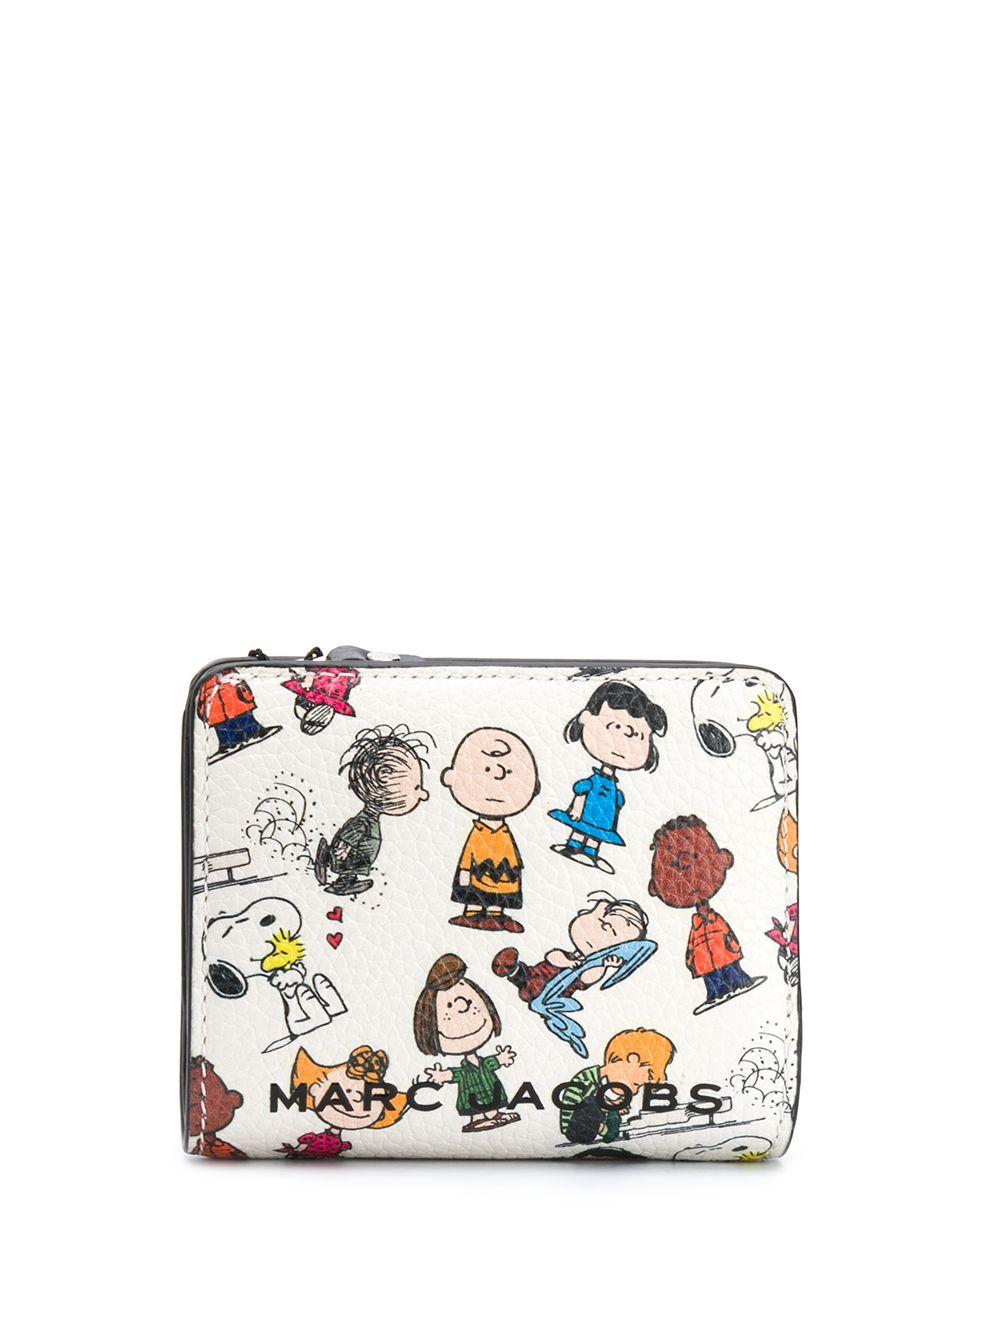 Marc Jacobs X Peanuts The Box Mini Compact Wallet in White - Lyst